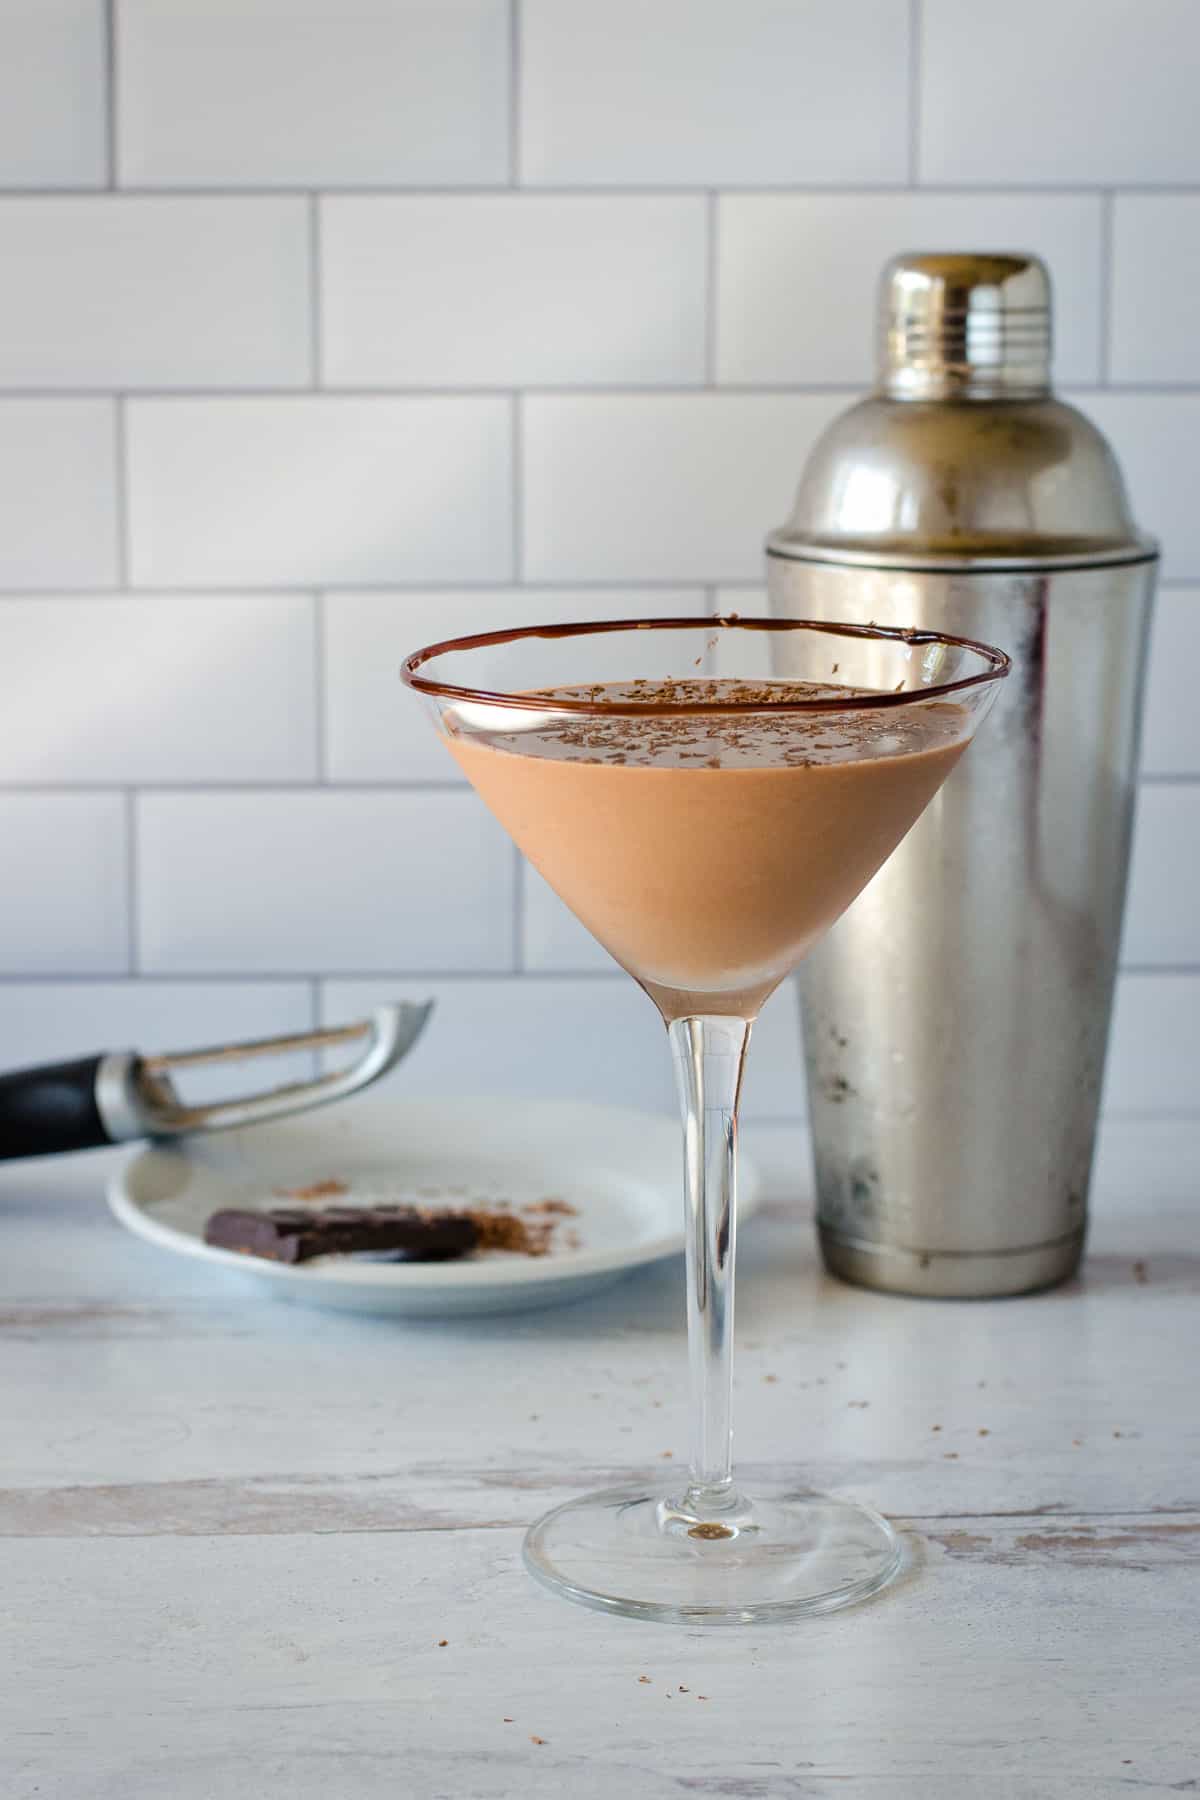 Chocolate martini with chocolate shavings and cocktail shaker